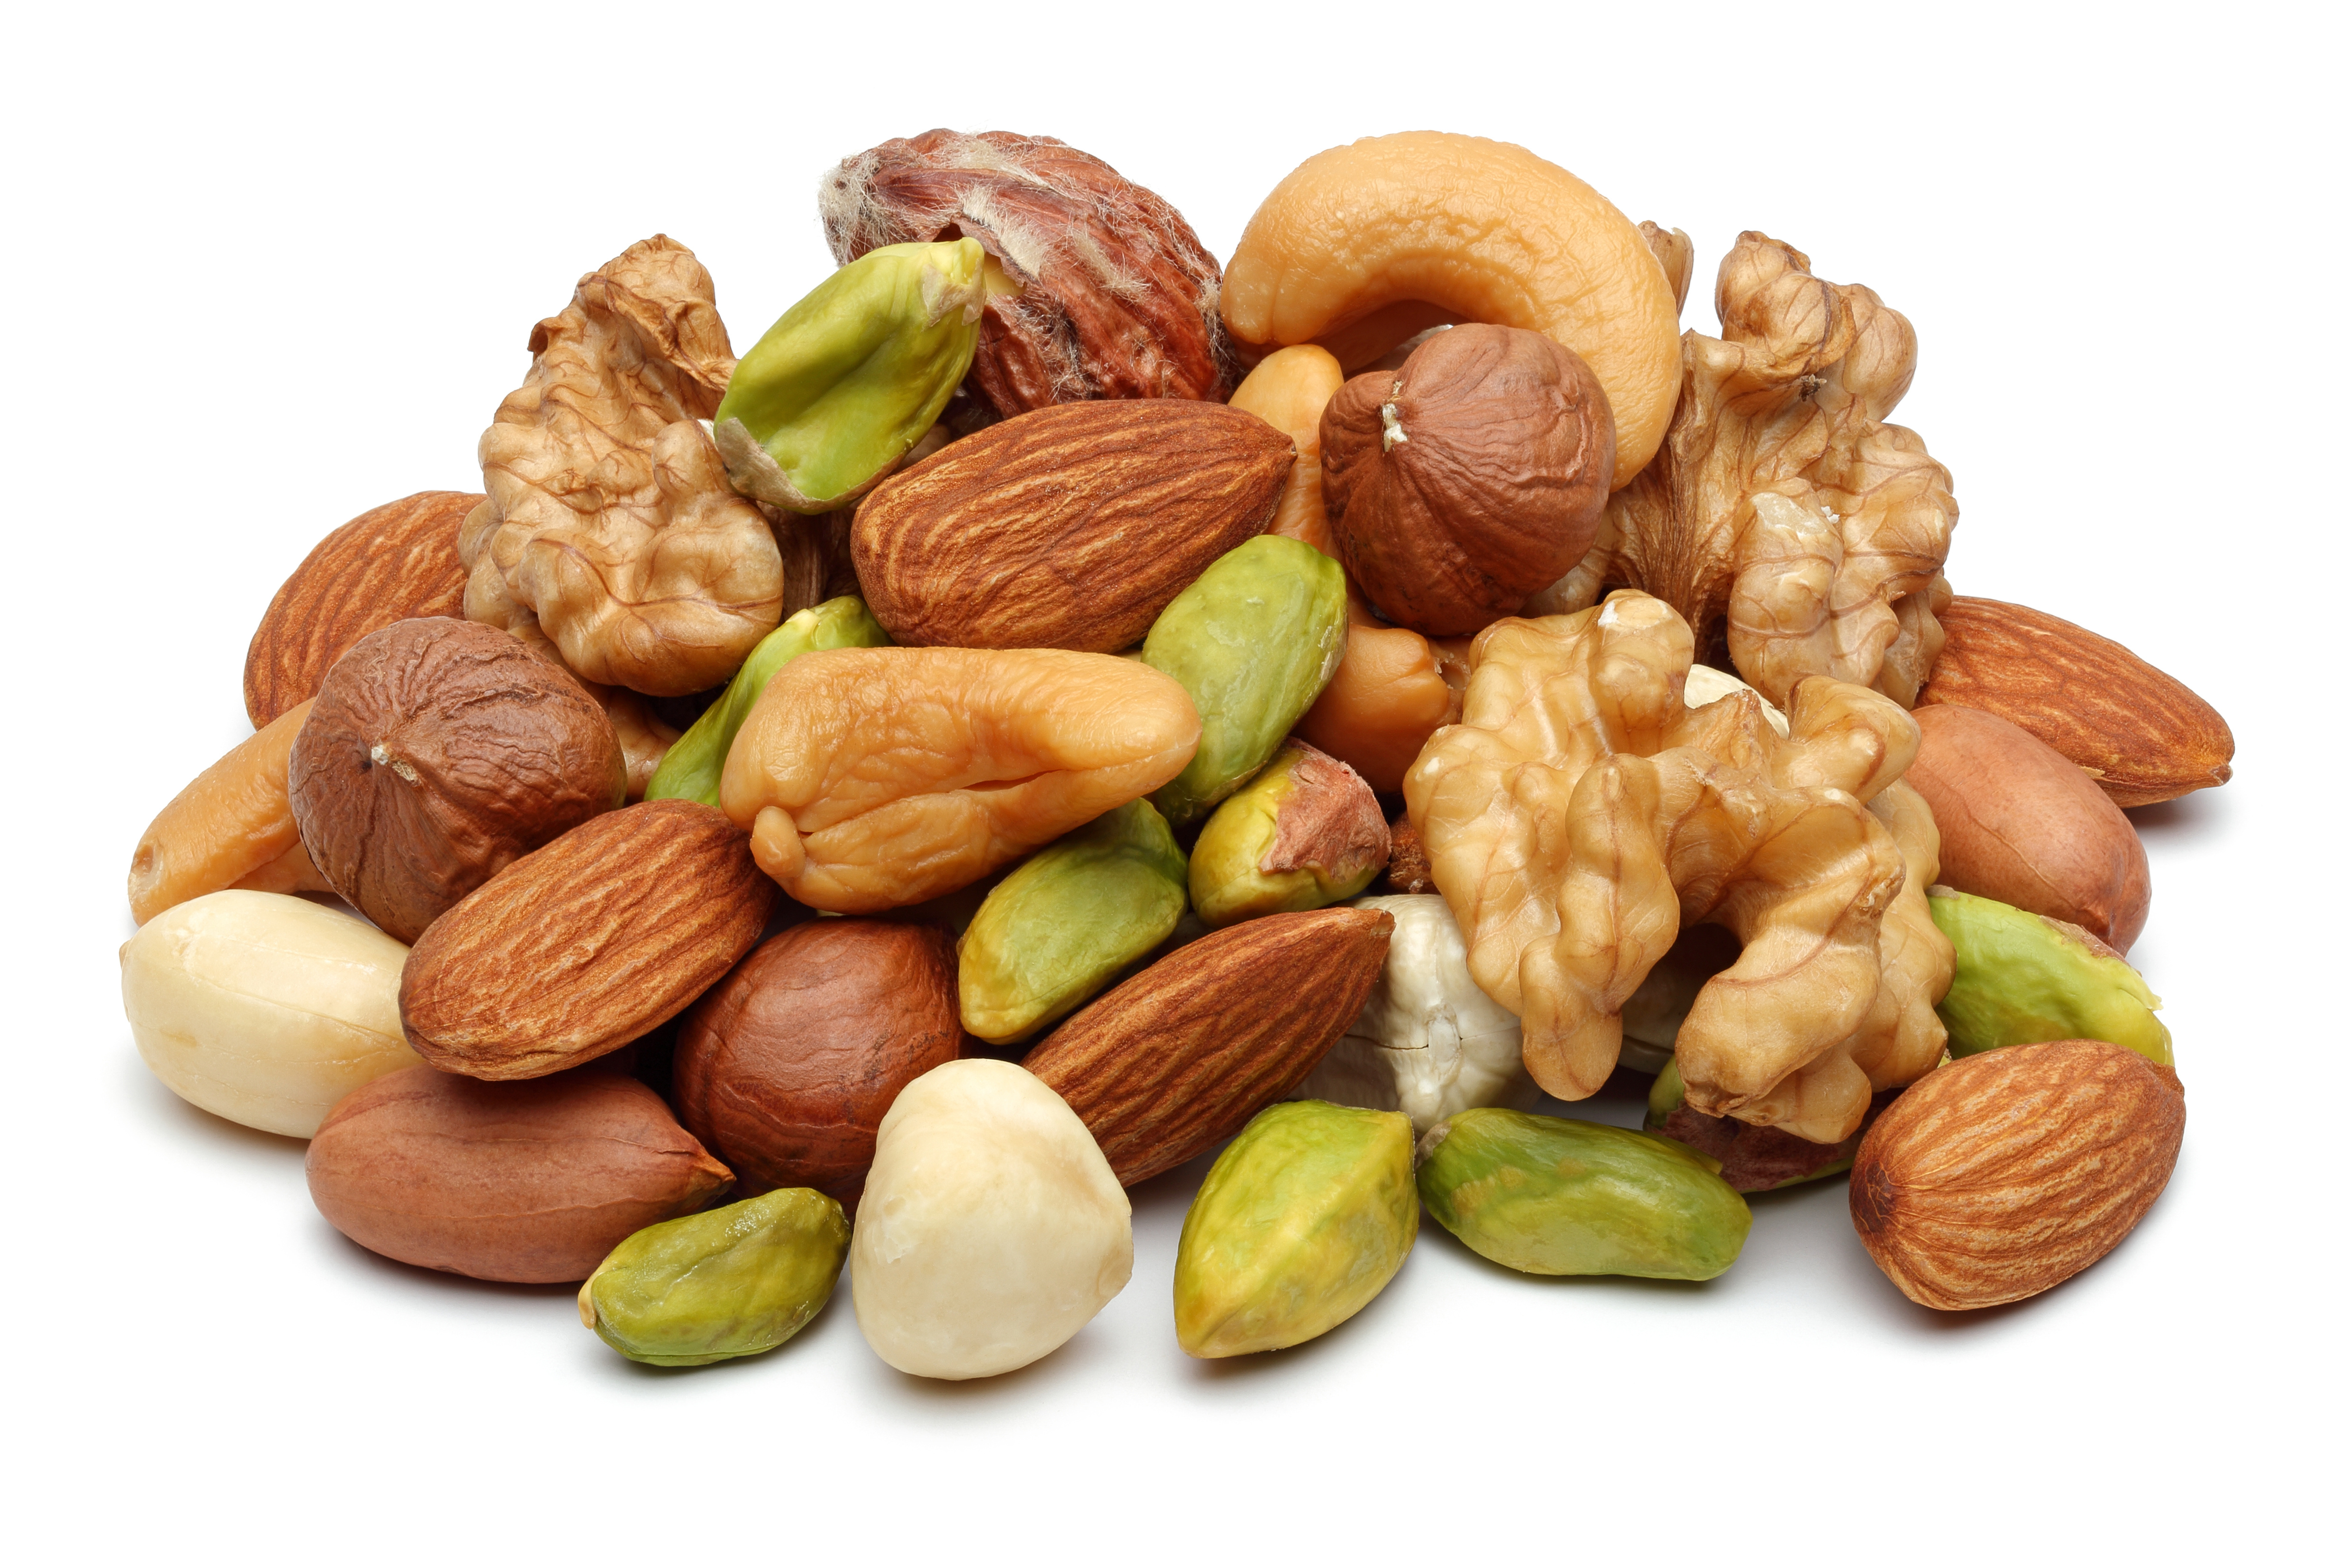 go-nuts-nuts-make-for-a-healthy-diet